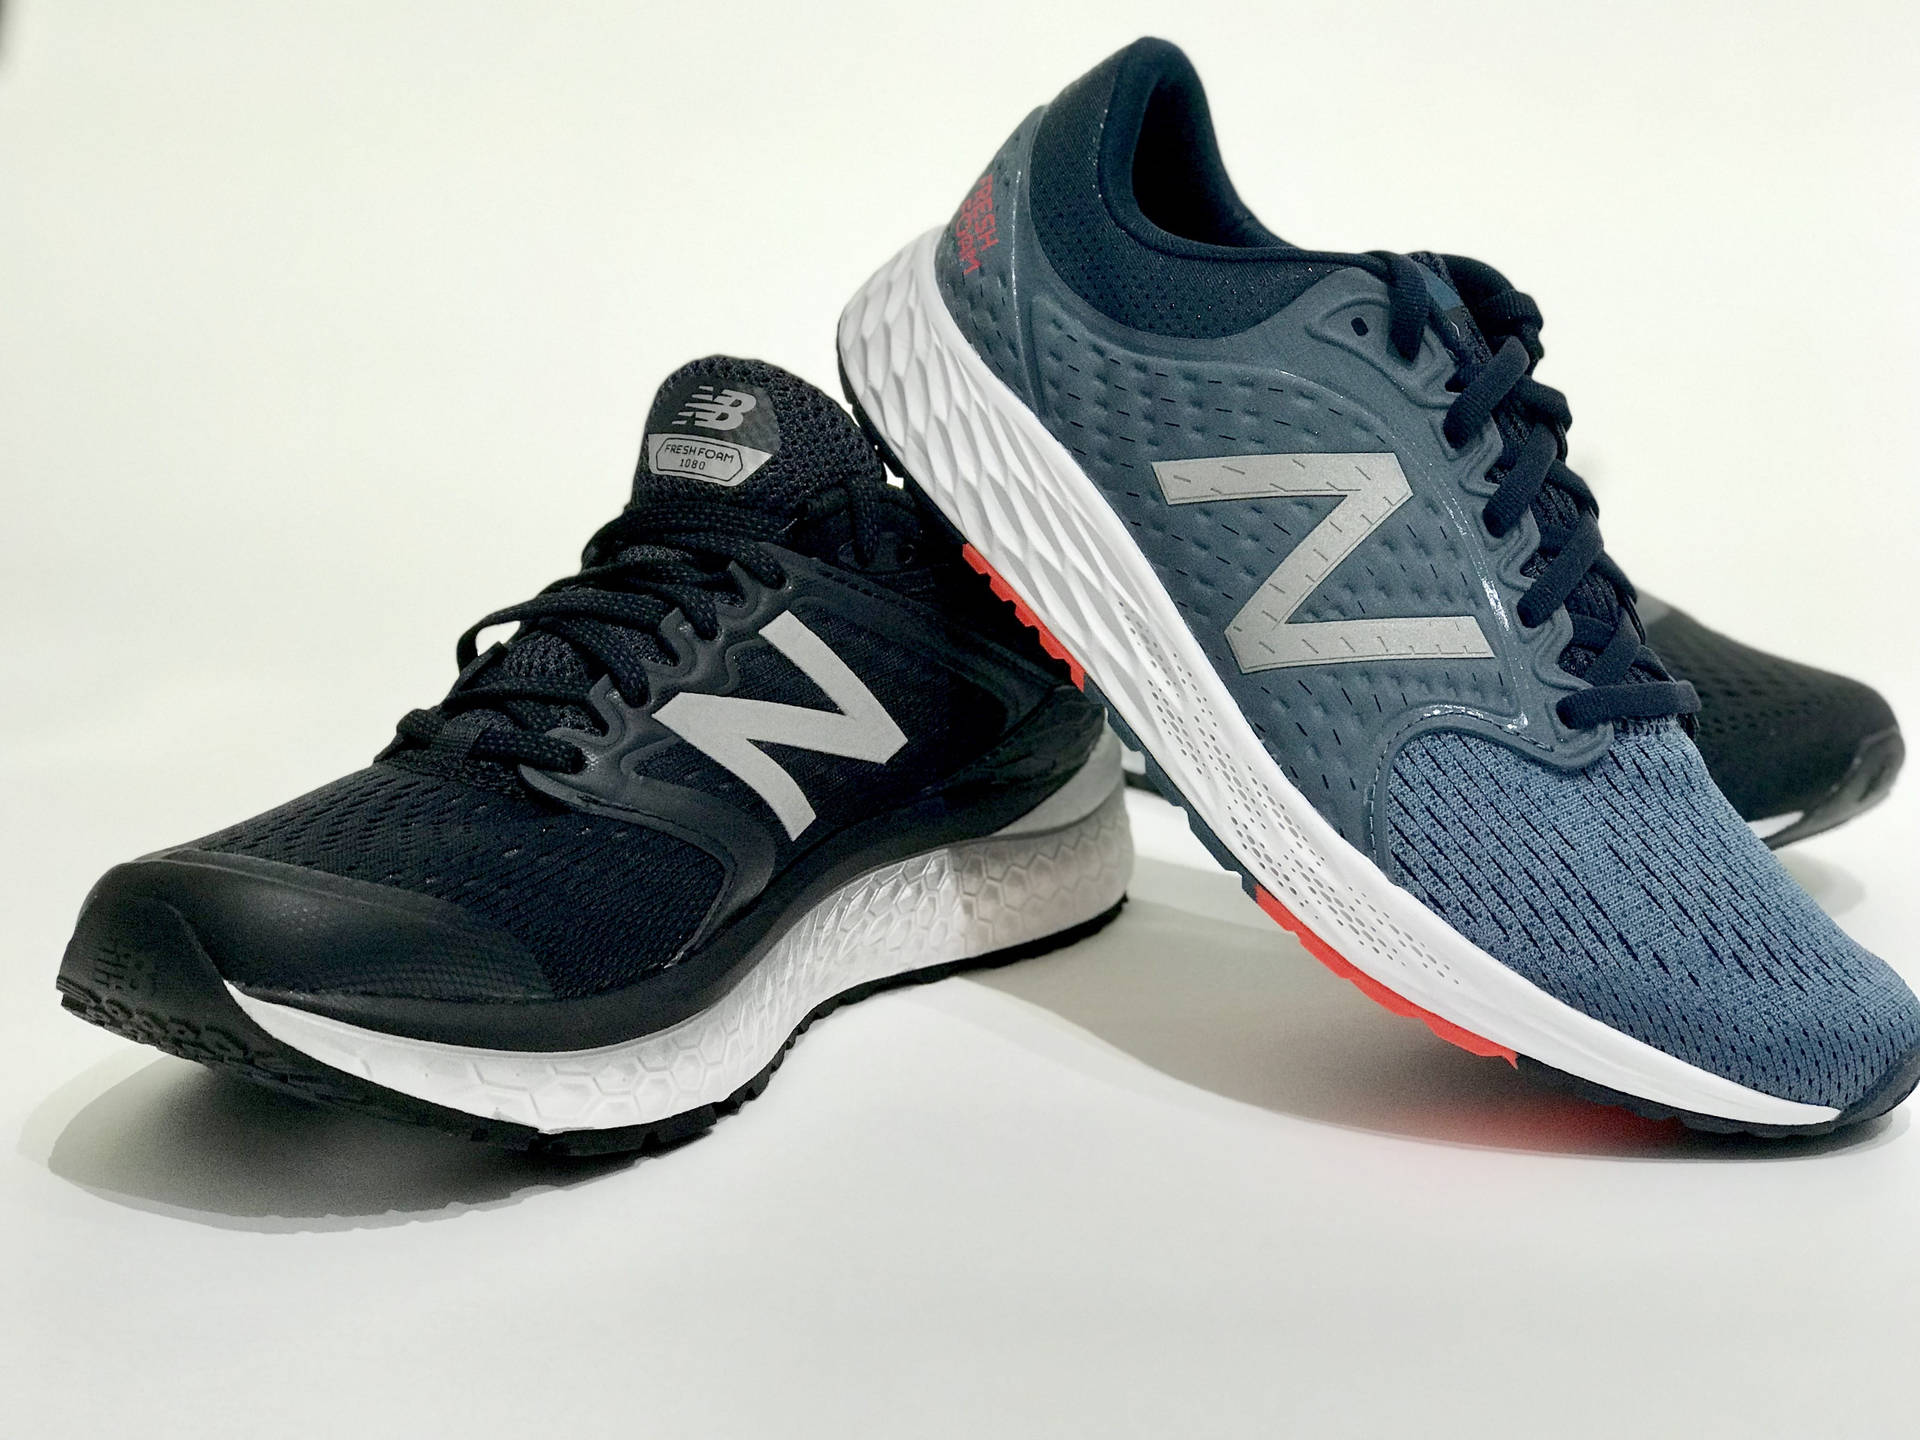 New Balance Different Coloured Pair